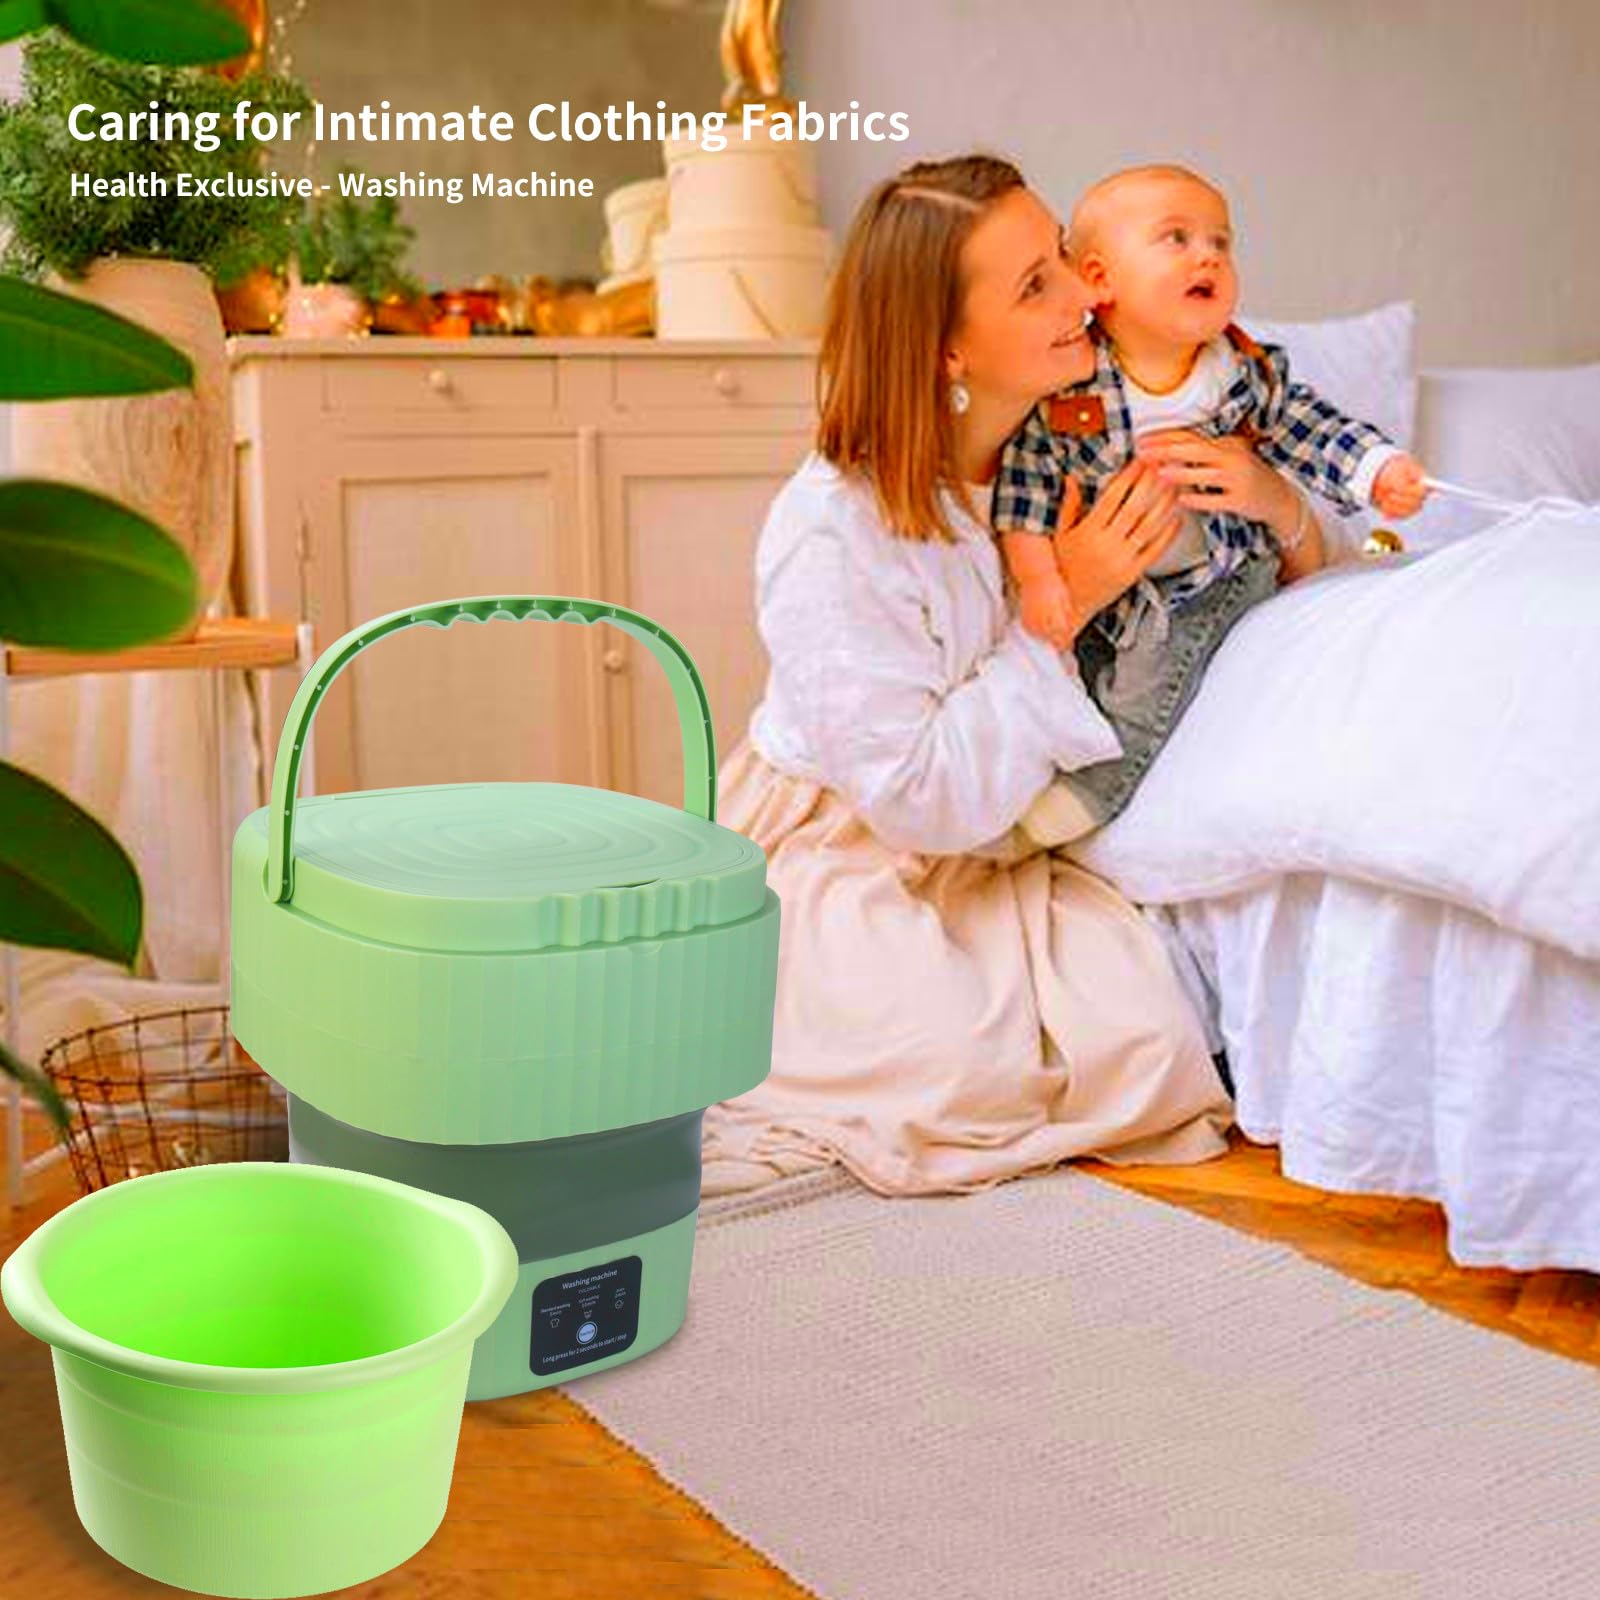 Portable Washing Machine,Mini Foldable Washer and Spin Dryer, Small Washer for Baby Clothes, Underwear or Small Items, Apartment, Dorm, Camping, RV Travel laundry,Lightweight and Easy to Carry, Green